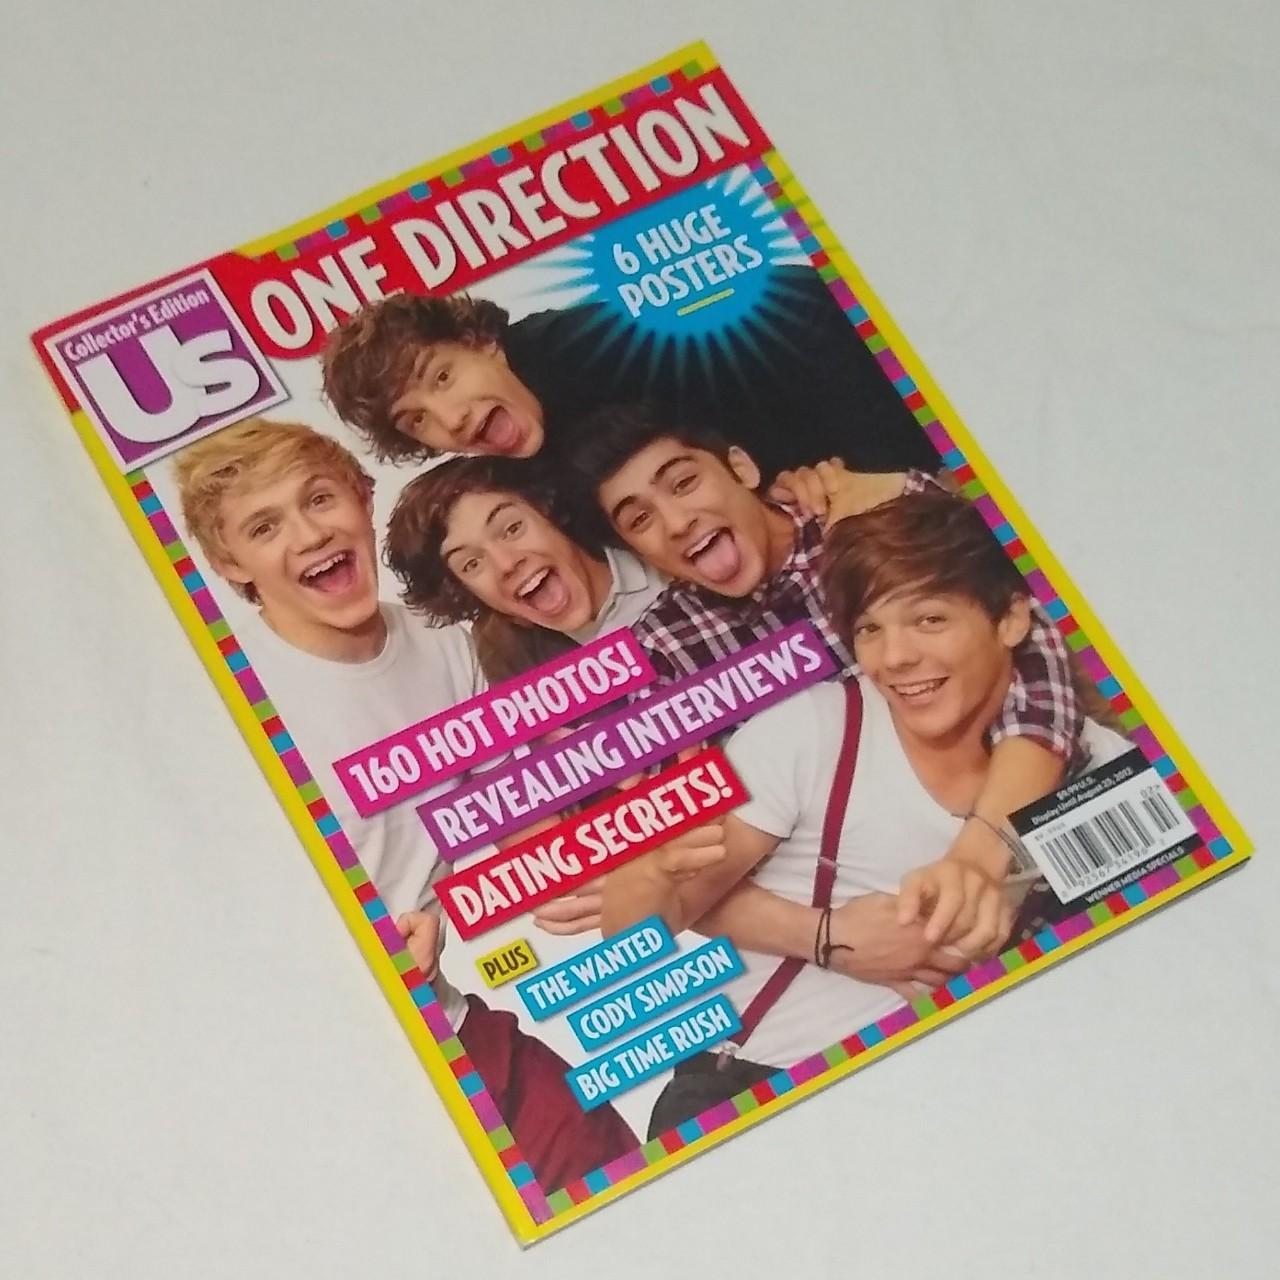 1D One Direction collectors edition Us magazine from - Depop